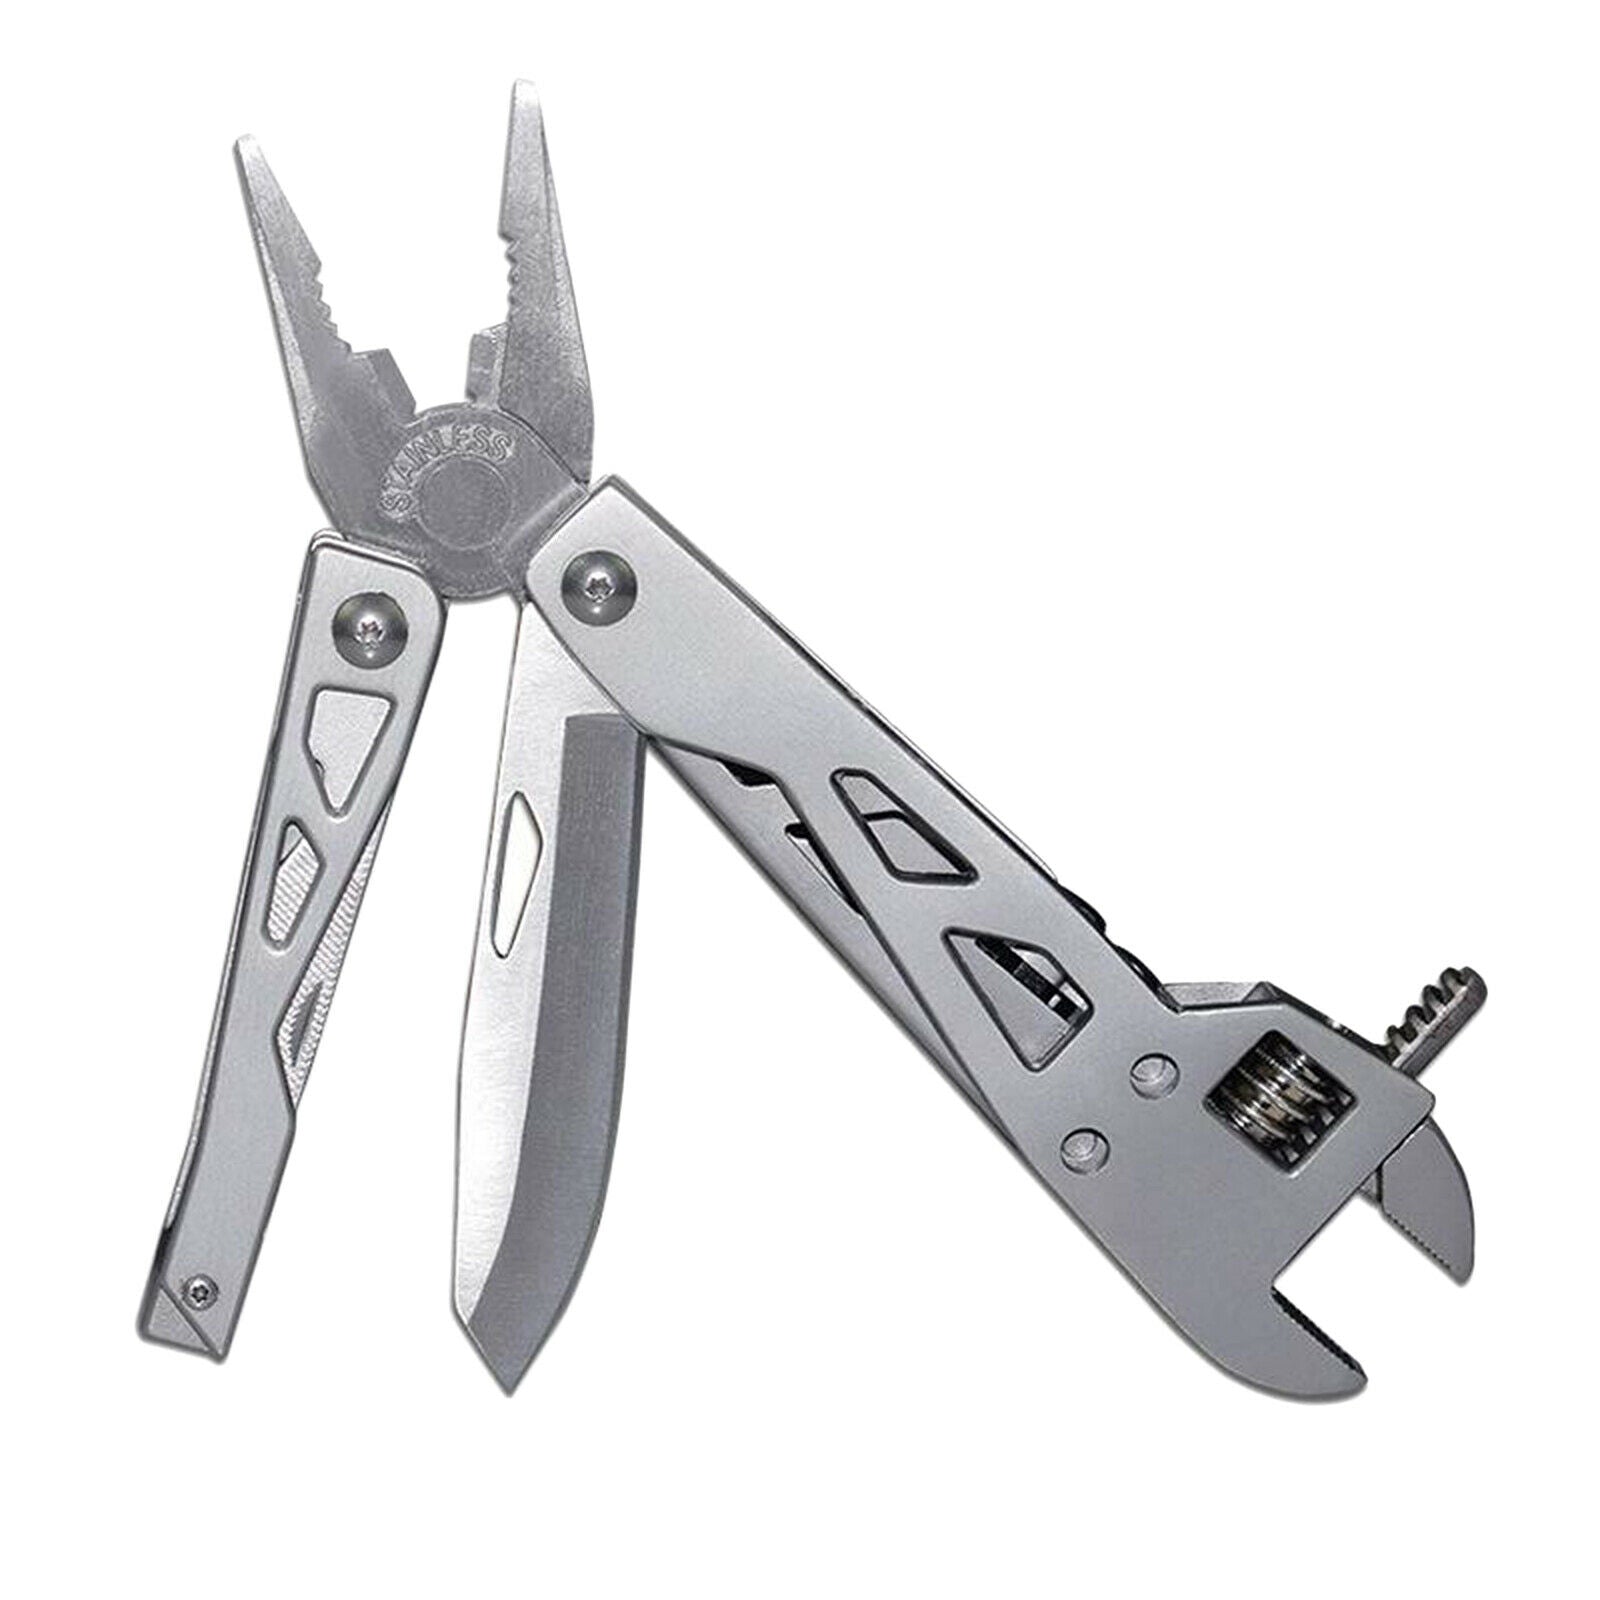 Multitool Pliers Multi-tool  Plier Easy And Convenient to Use Gifts for Dad